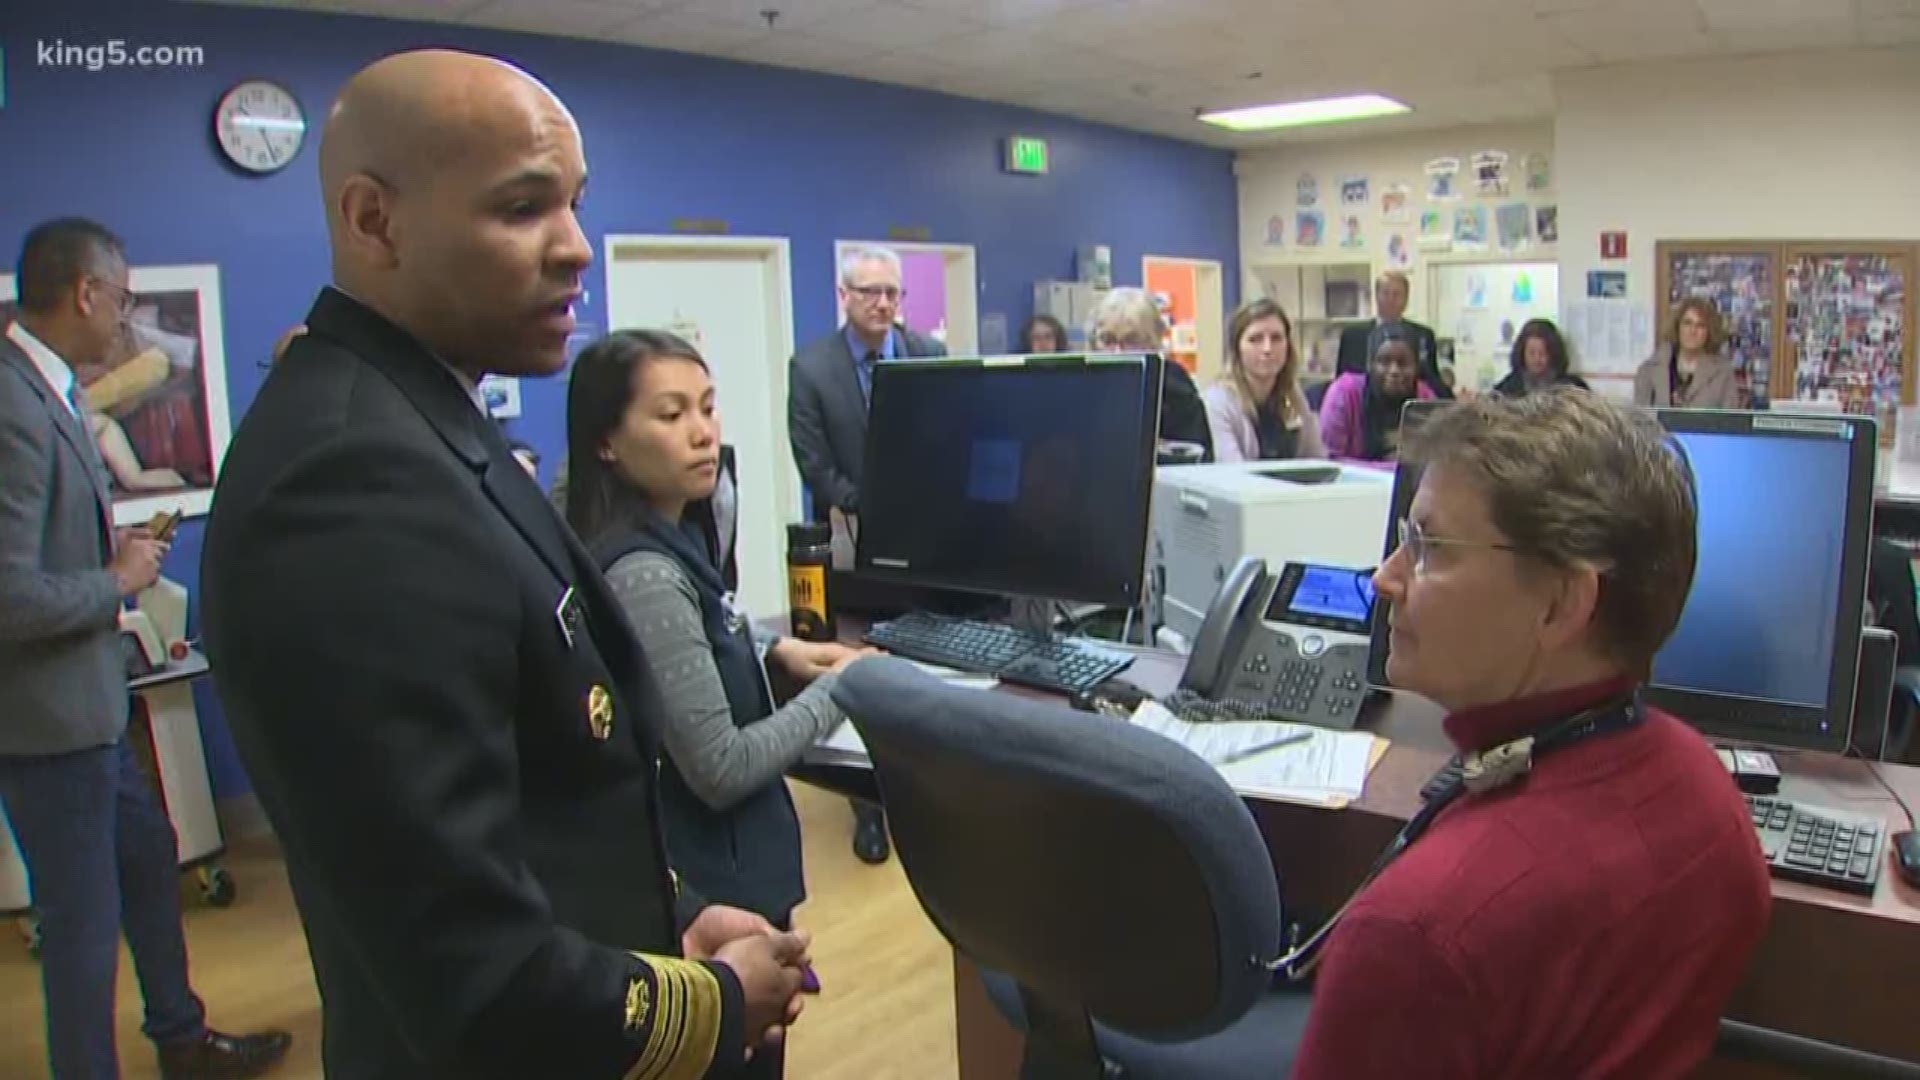 Washington's measles outbreak, which has sickened 71 people, has attracted the attention of the nation's top doctor, the Surgeon General. He visited a Seattle clinic today to explain what health officials can do to get more people vaccinated. KING 5's Ted Land has the details.